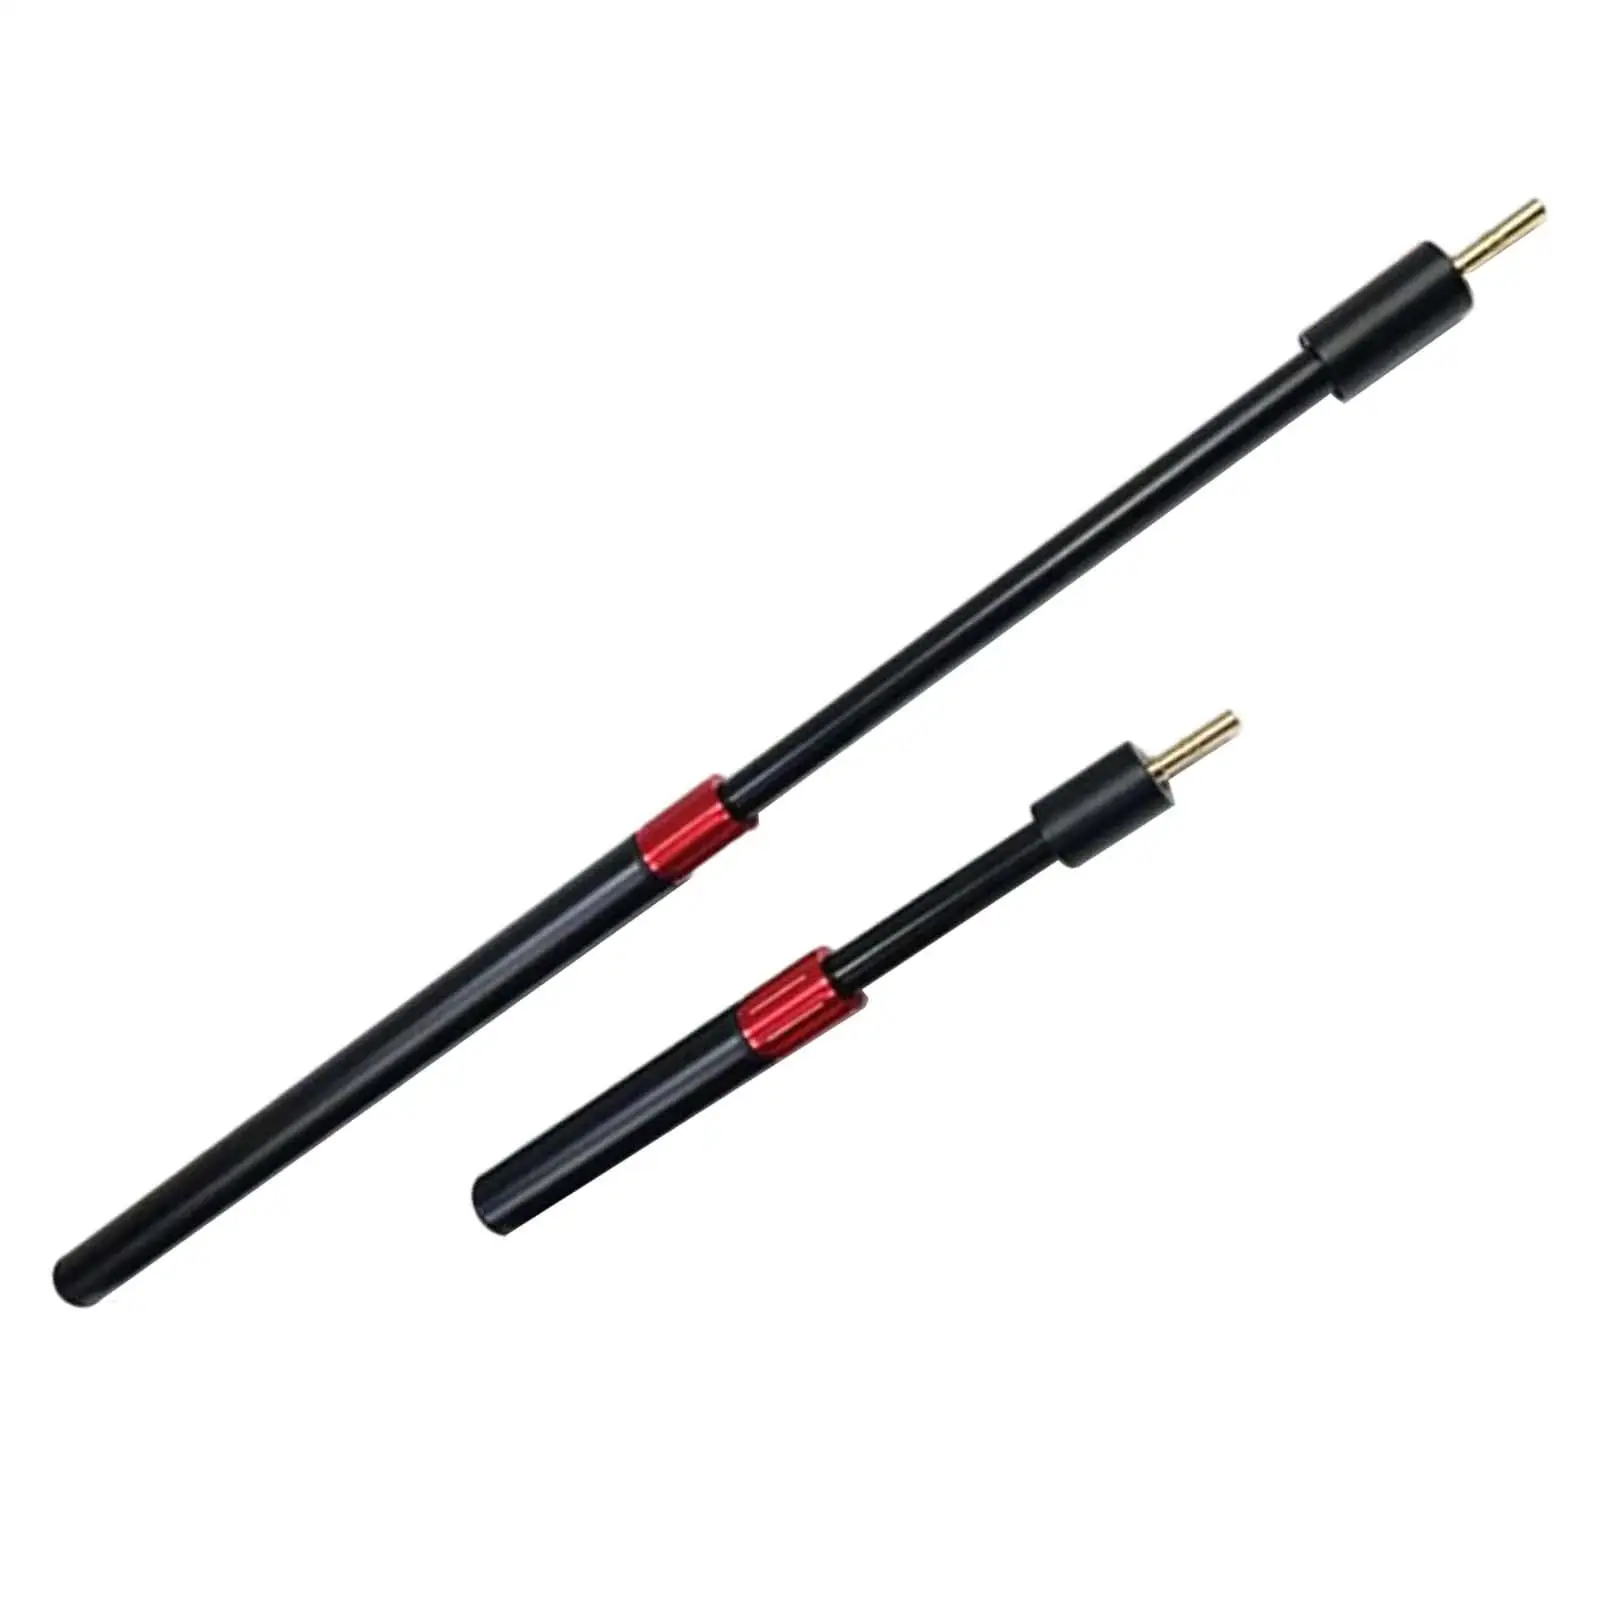 2Pcs Billiards Cue Extension Attachment Aluminum Alloy 9inch 18inch Pool Cue Extension End Lengthener for Billiard Enthusiast